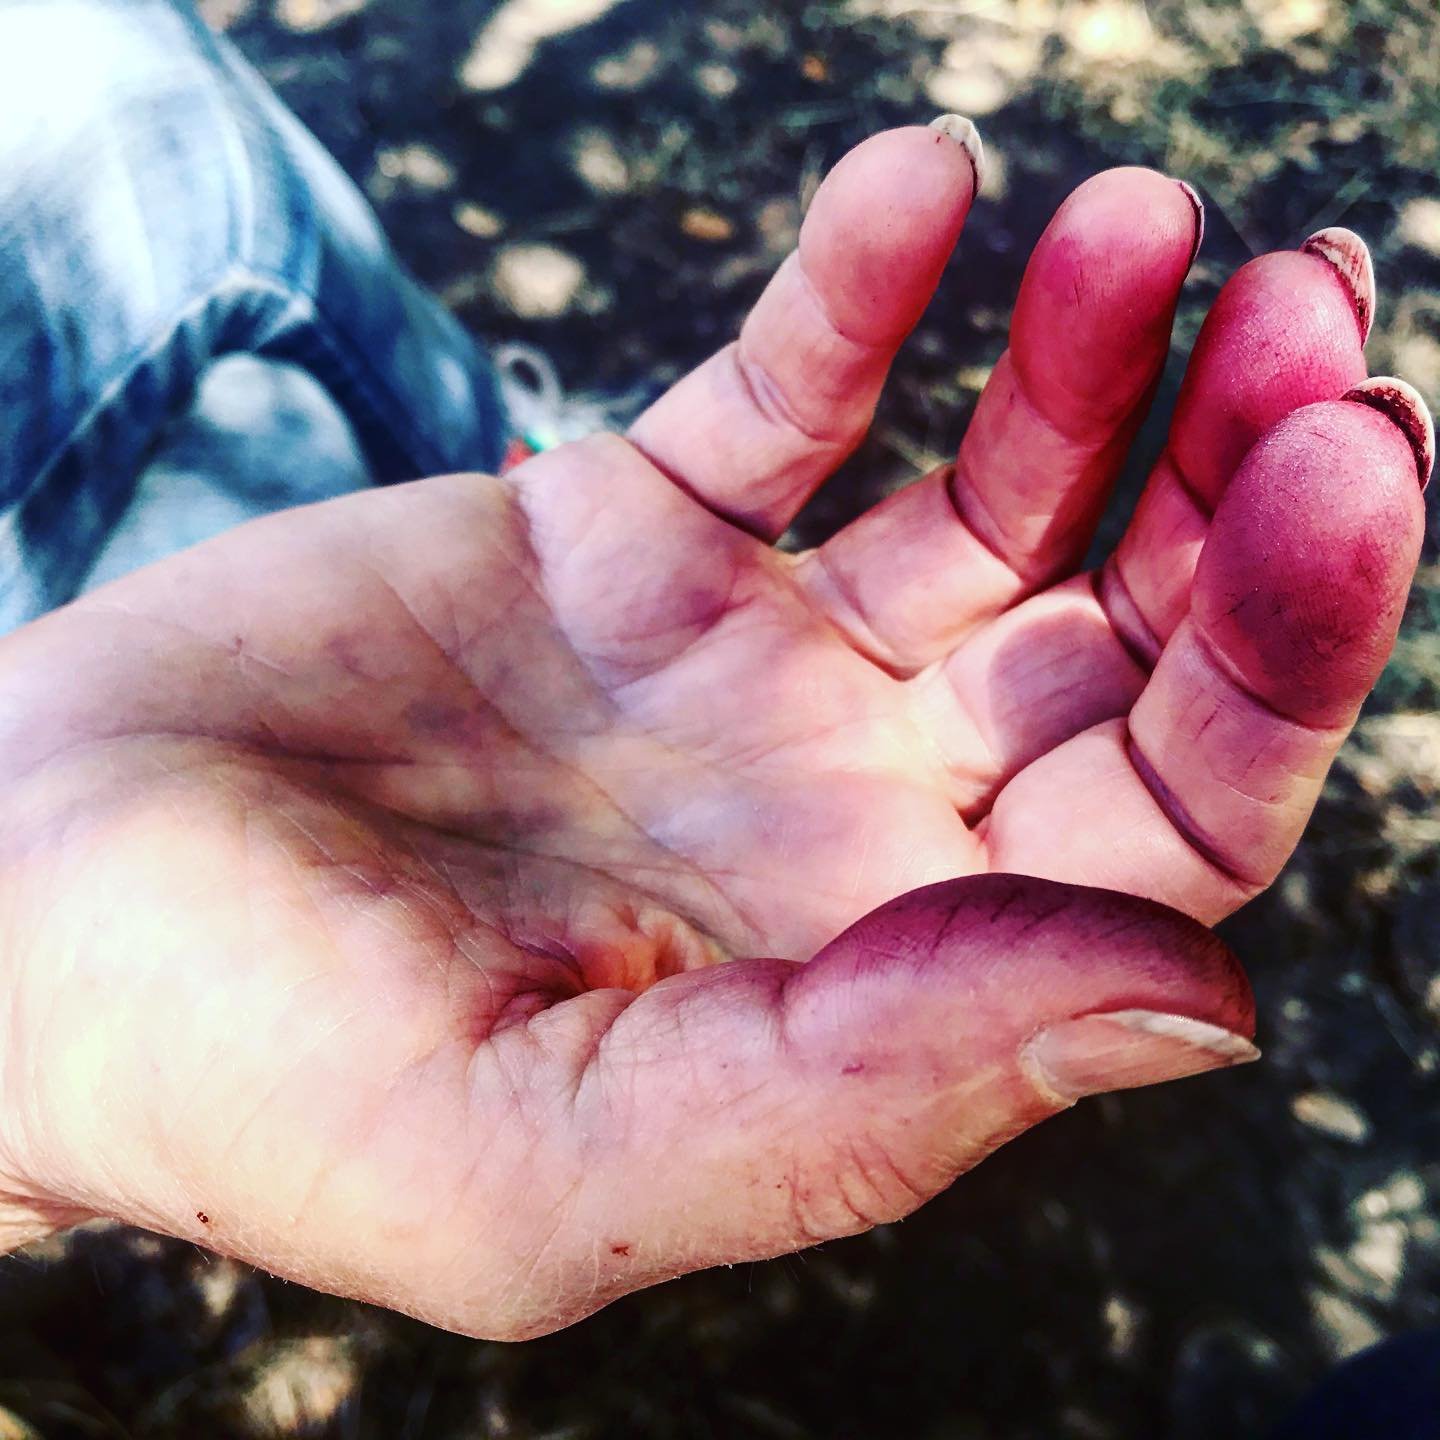 Blackberry Mom Claw: so perilous and witchy-delicious! Yesterday I met up with my mother to harvest berries in one of her secret spots. She picks about twice as fast as I do and offers plenty of unsolicited advice on my technique. She even brought so